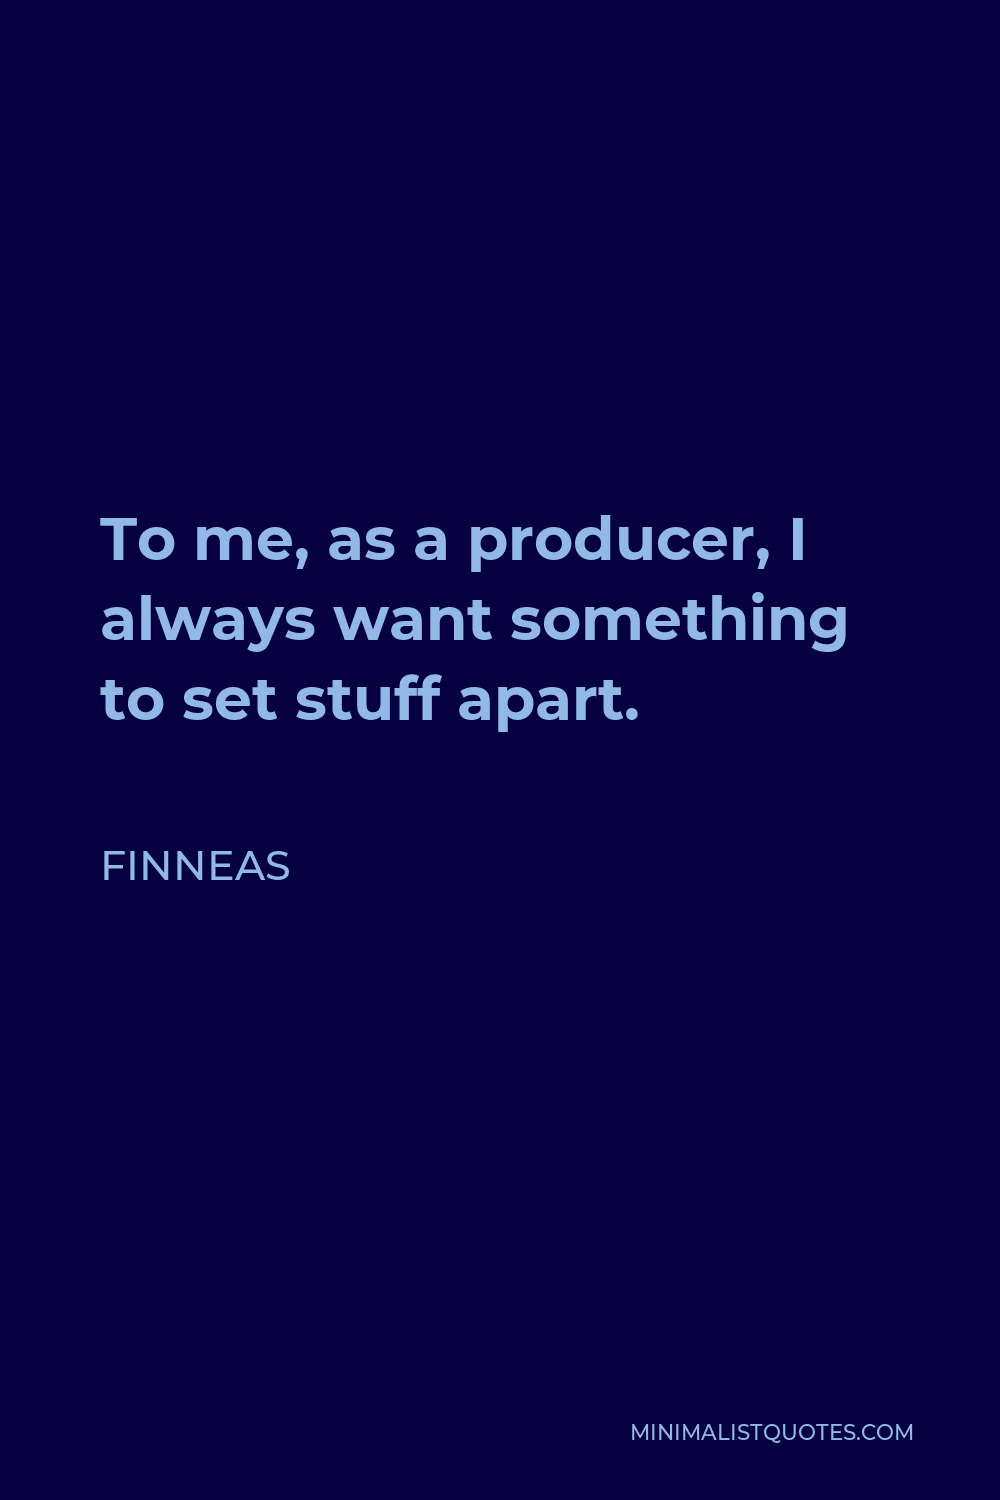 Finneas Quote - To me, as a producer, I always want something to set stuff apart.